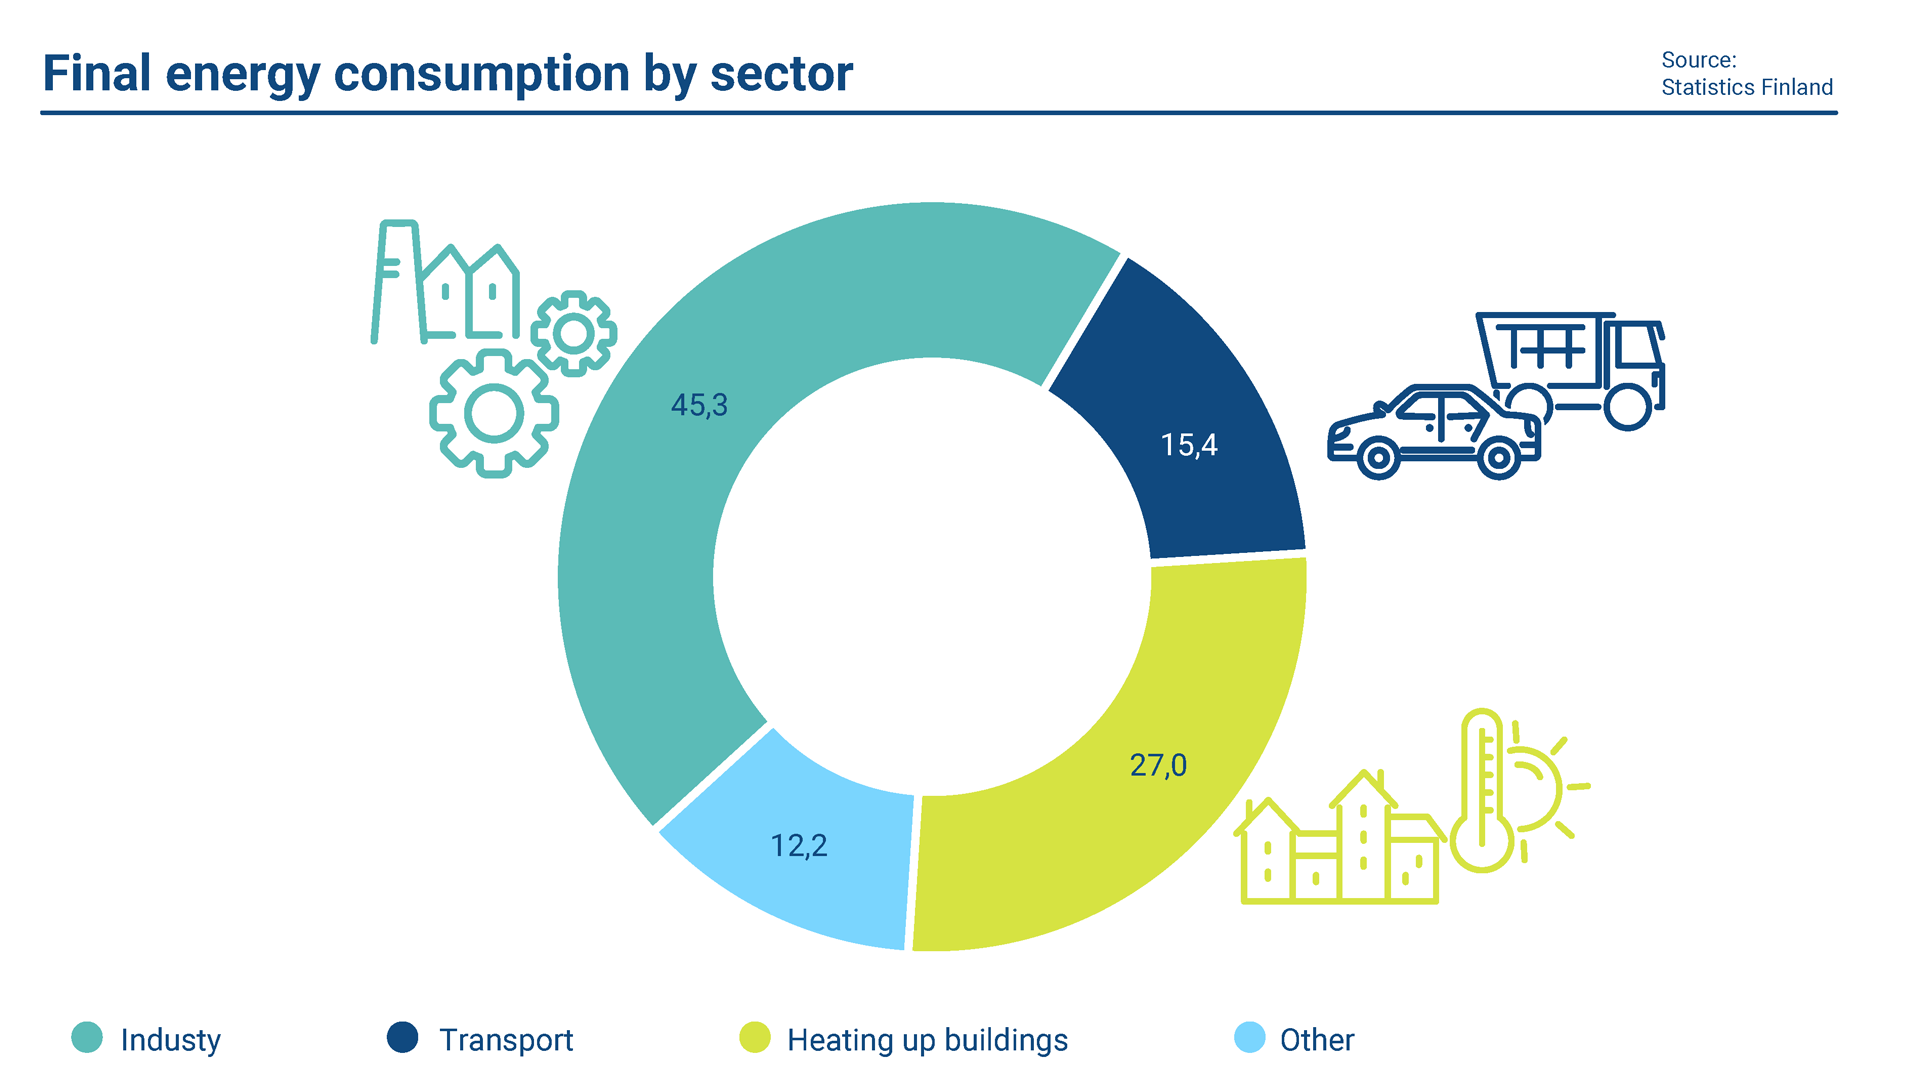 The image shows the final energy consumption by sector in 2021.